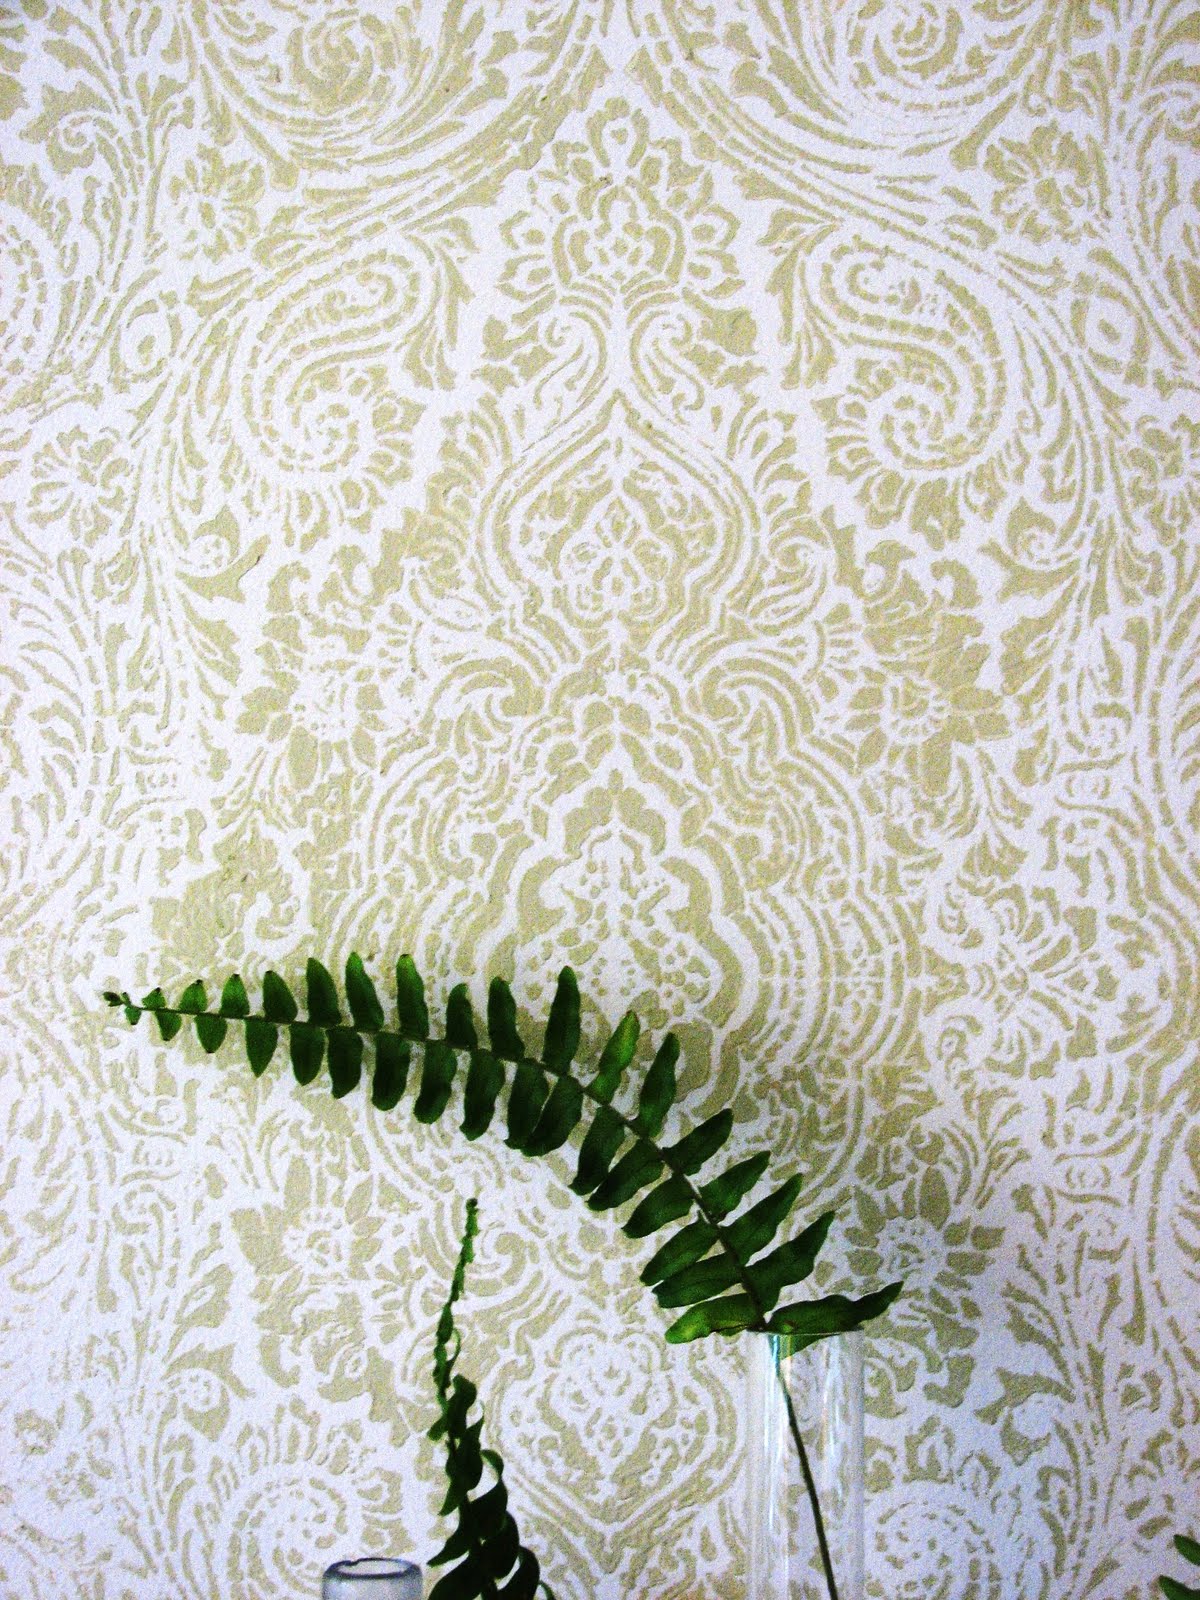 Well my sweet husband finished the LR wallpaper stenciling this weekend!